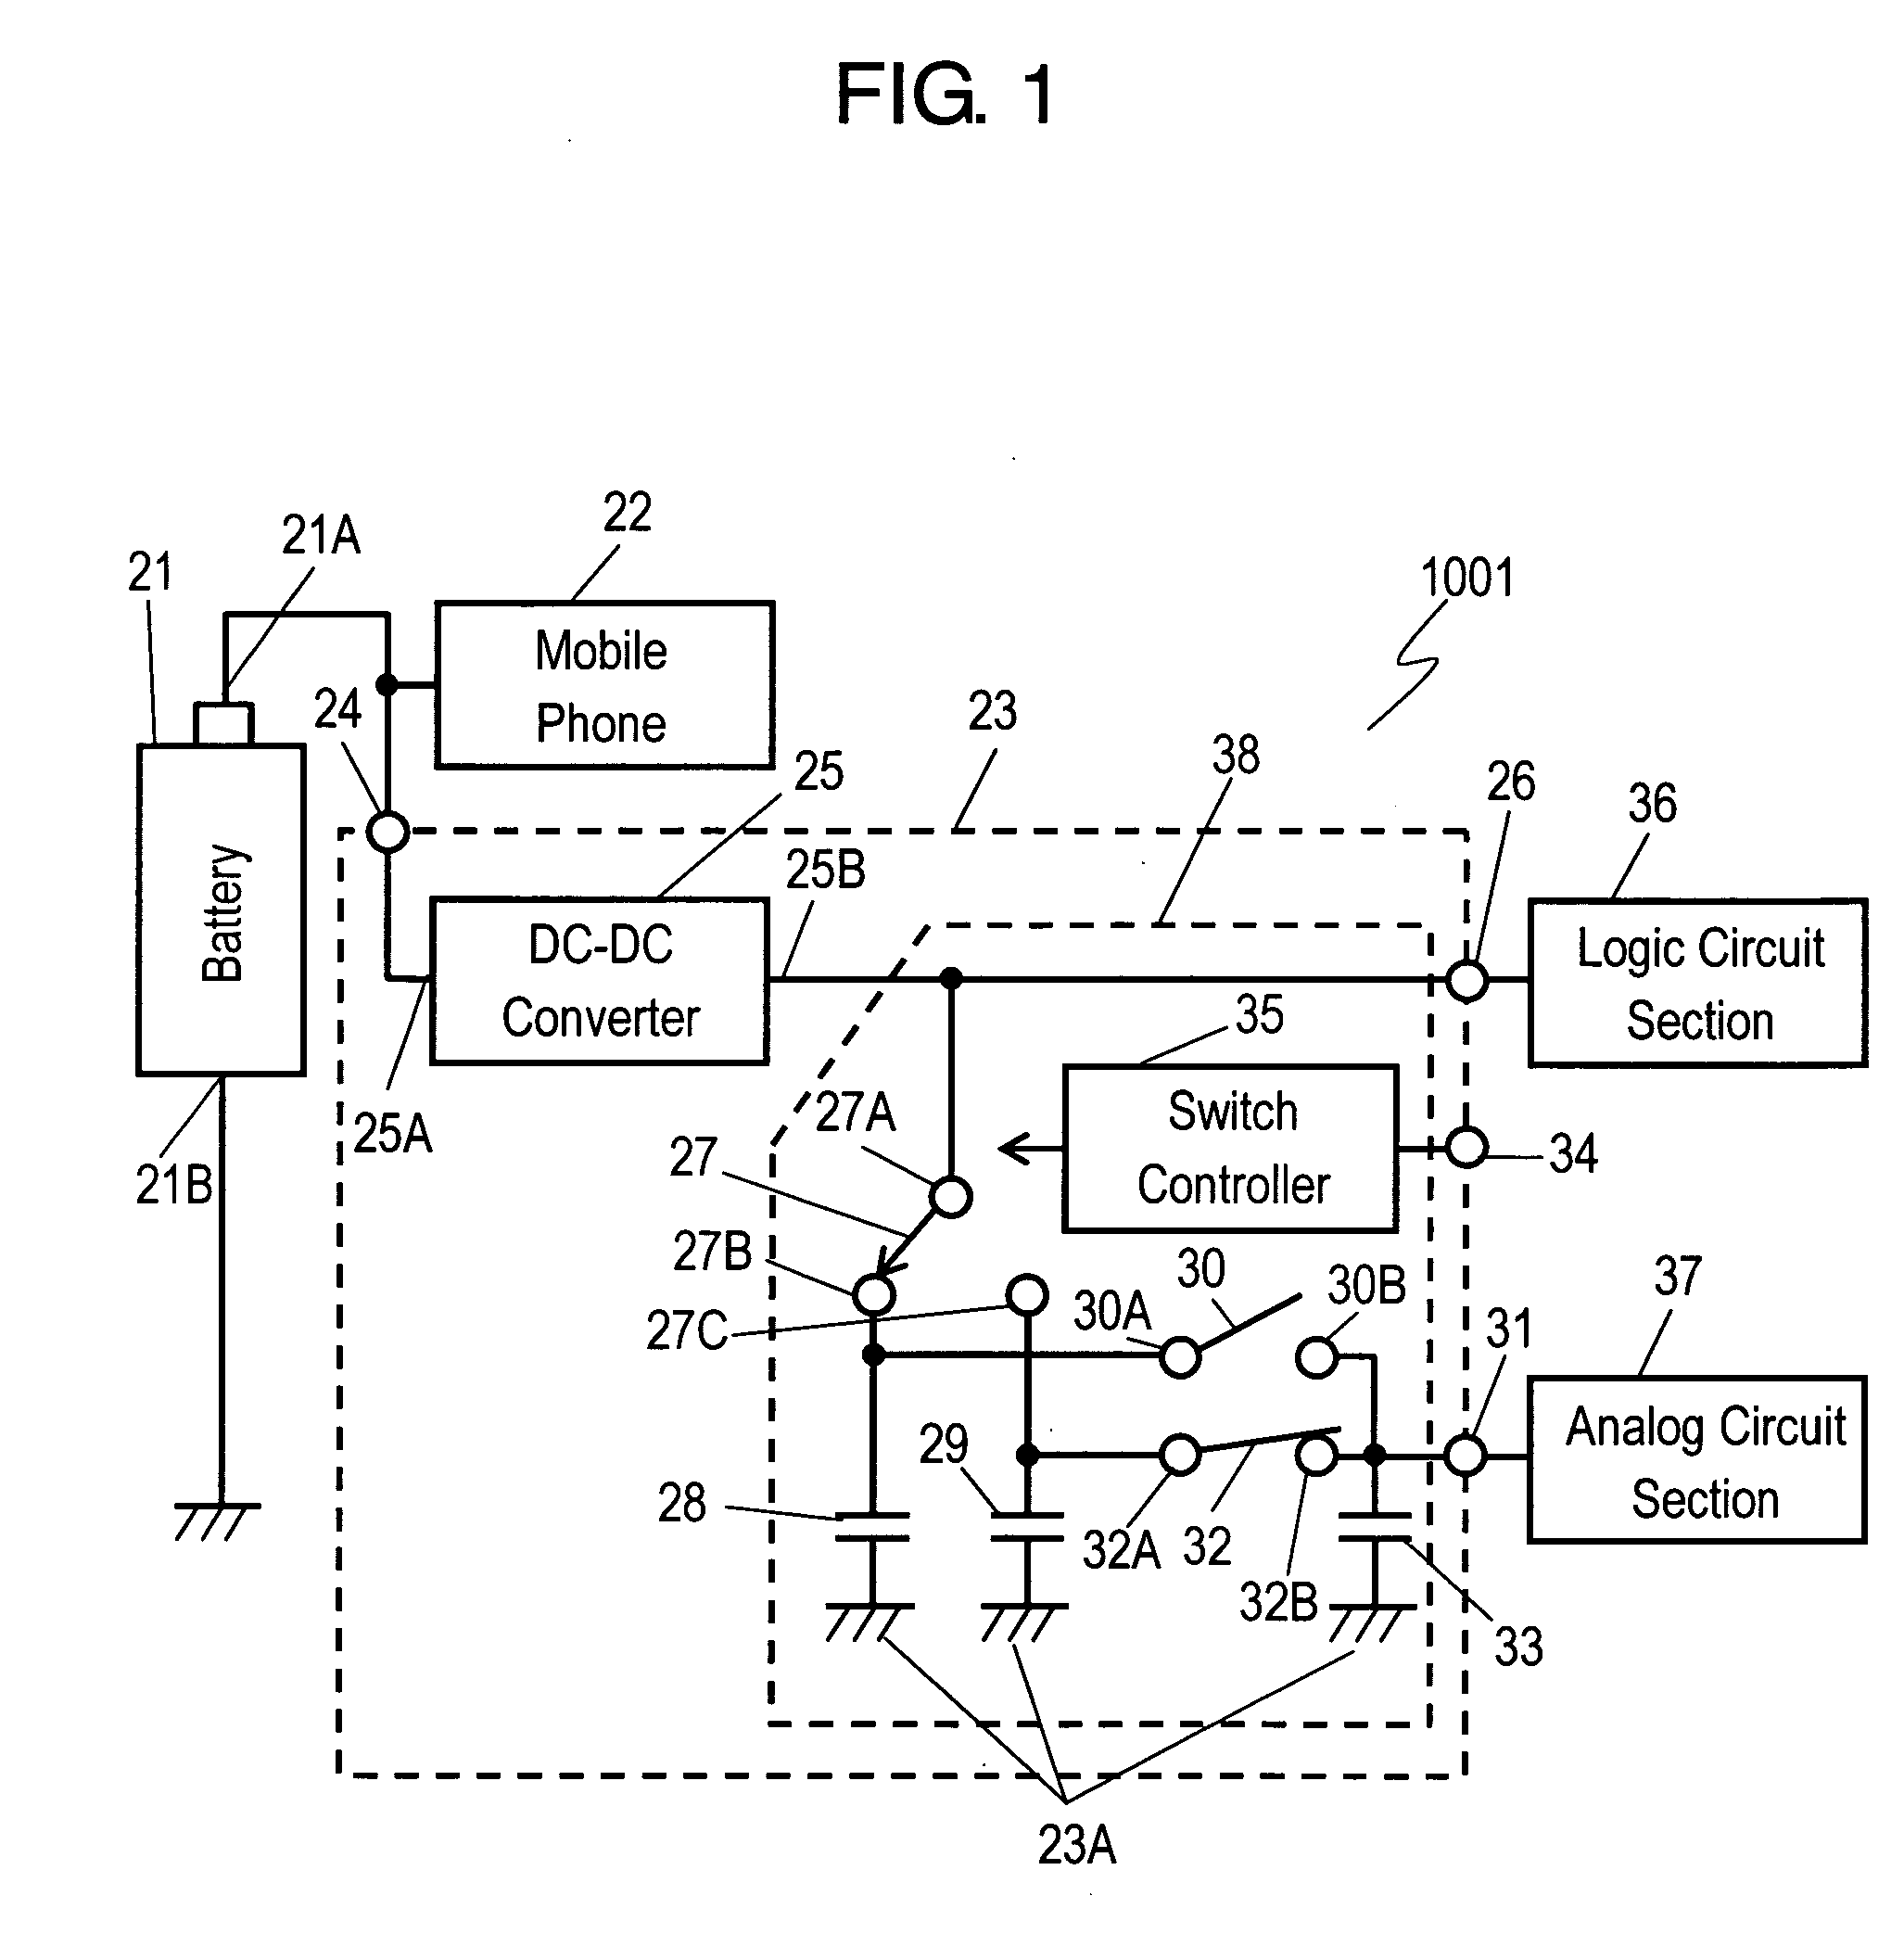 Power supply apparatus, method of controlling the apparatus, and electronic device using the apparatus